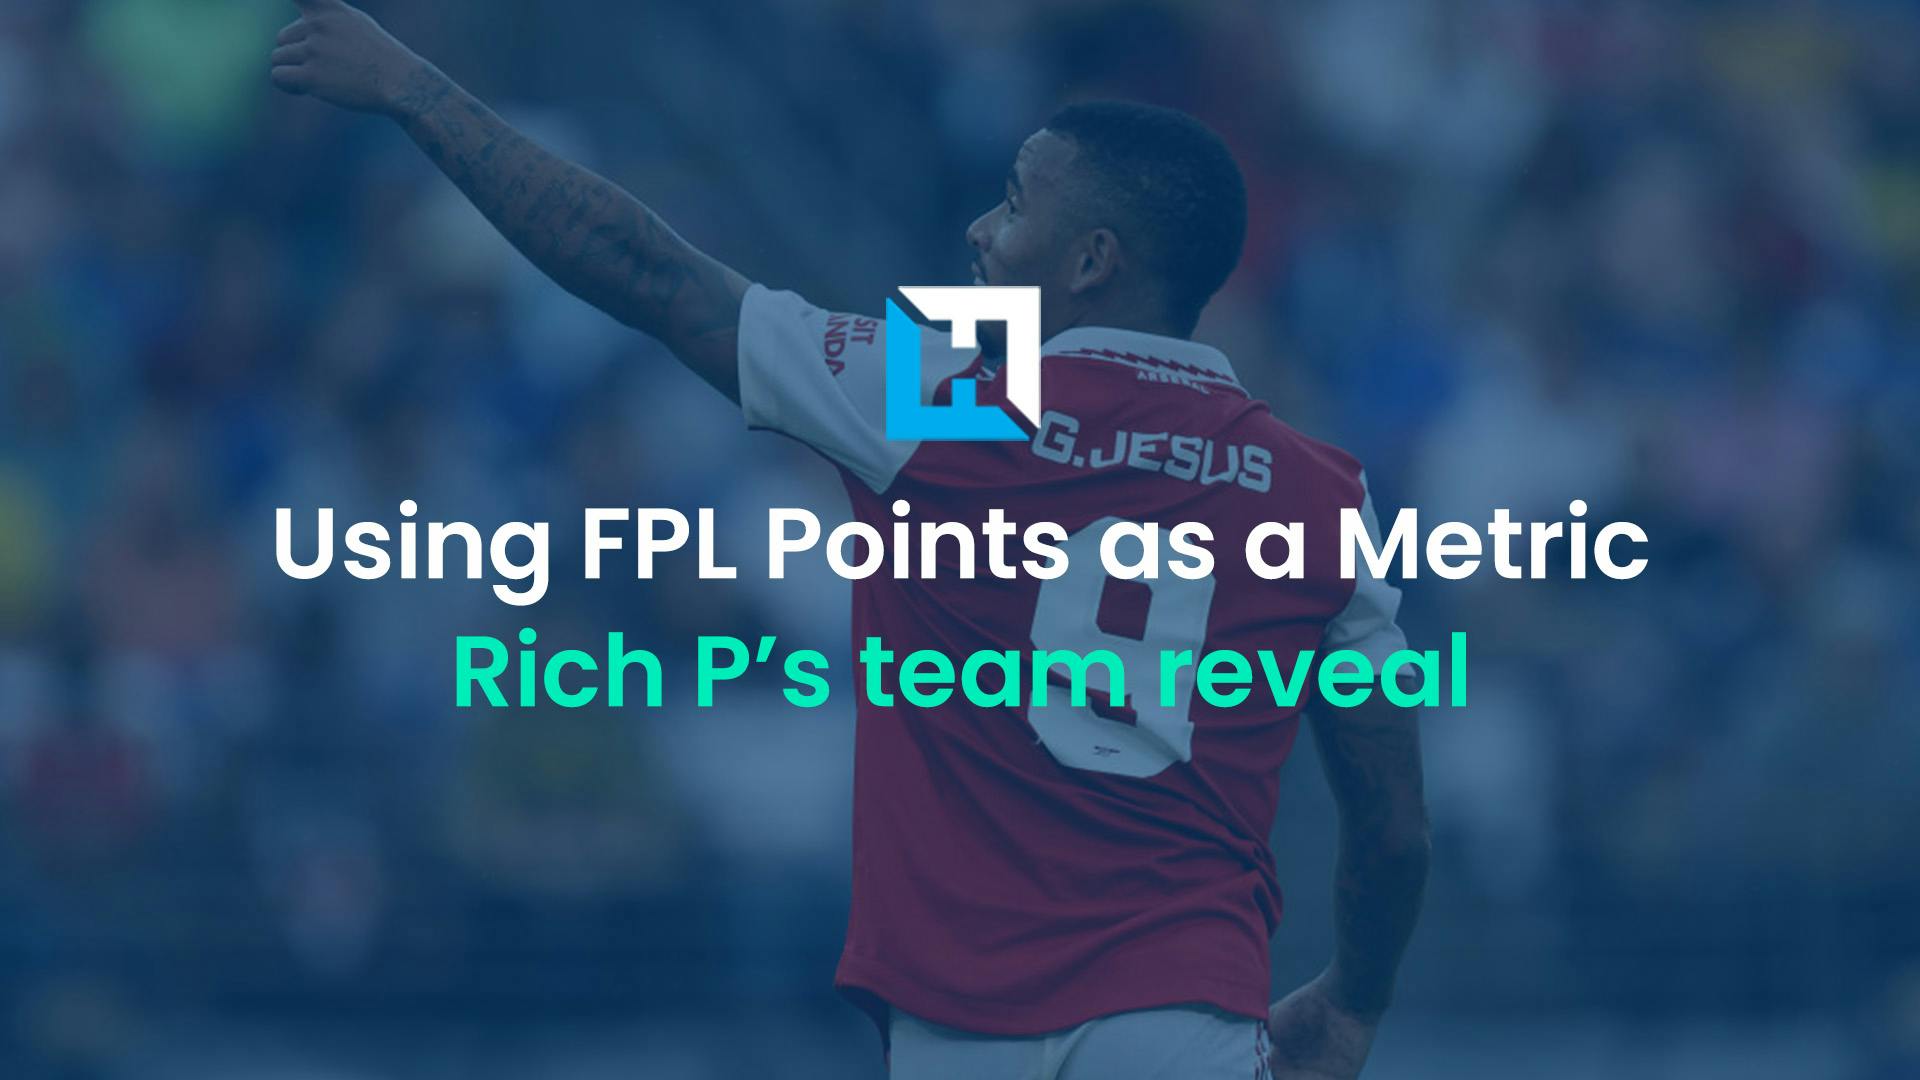 Using FPL Points as a Metric: Gameweek 3 team reveal 2022/23